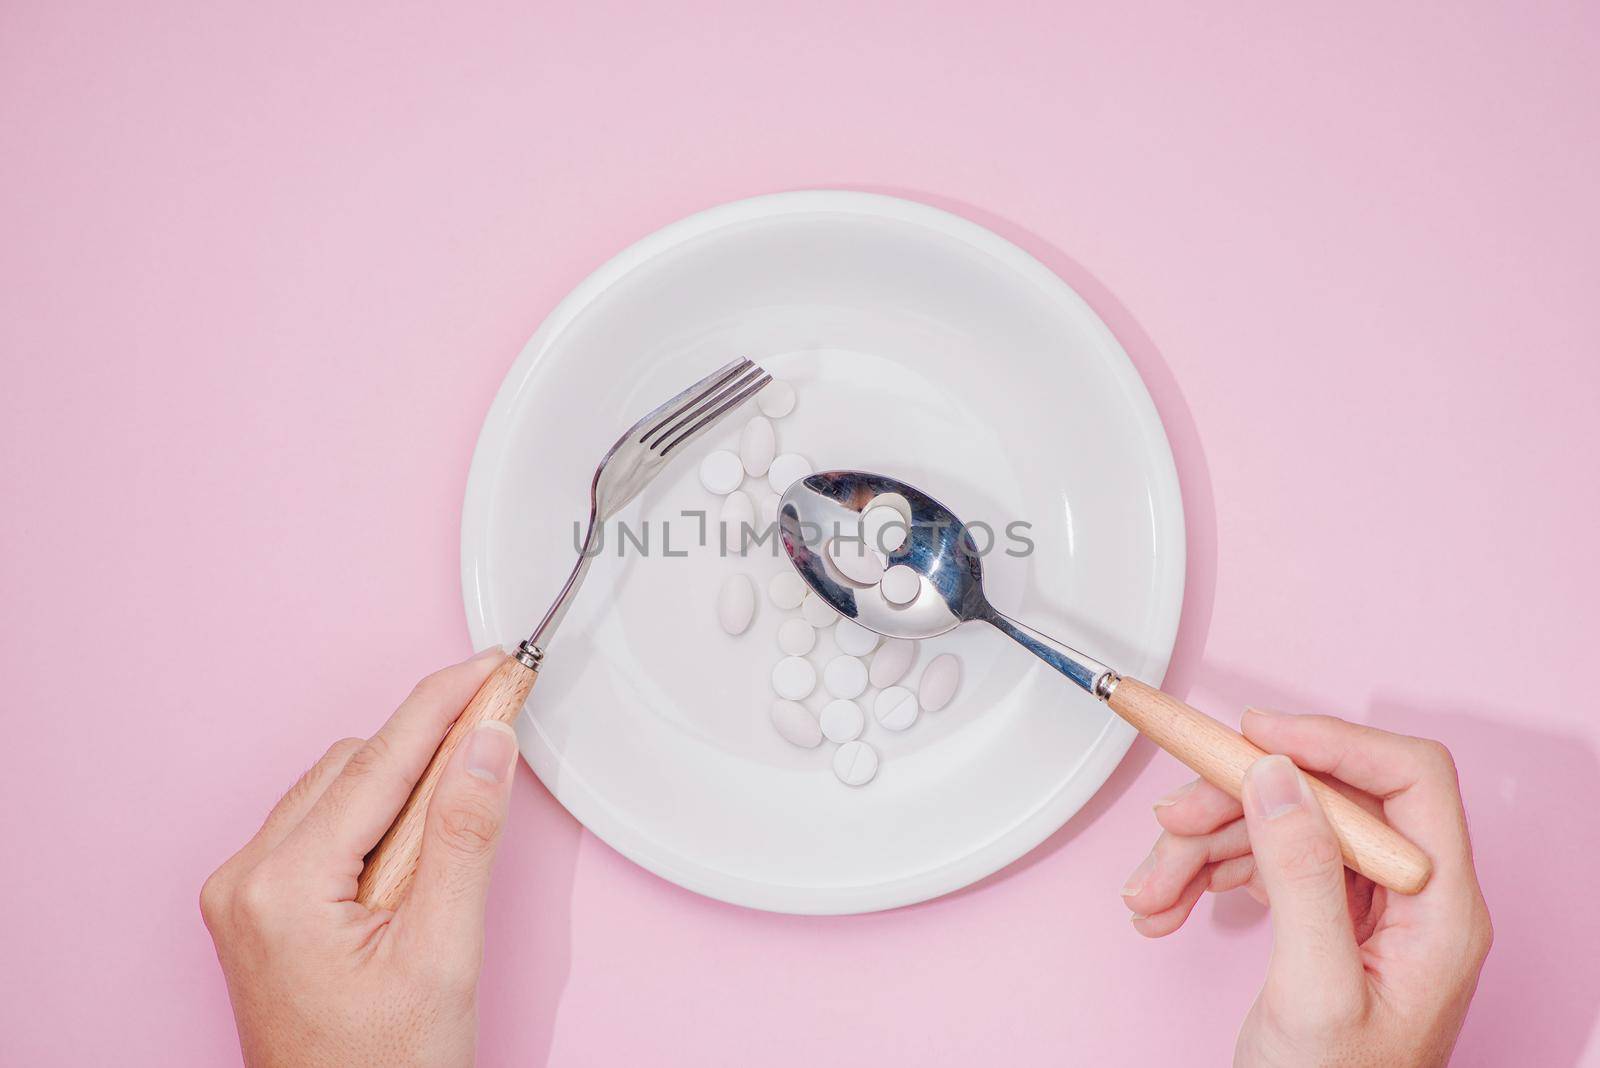 Top view of man's hands at dining table holding a fork and knife above dish with pills over pink background. by makidotvn